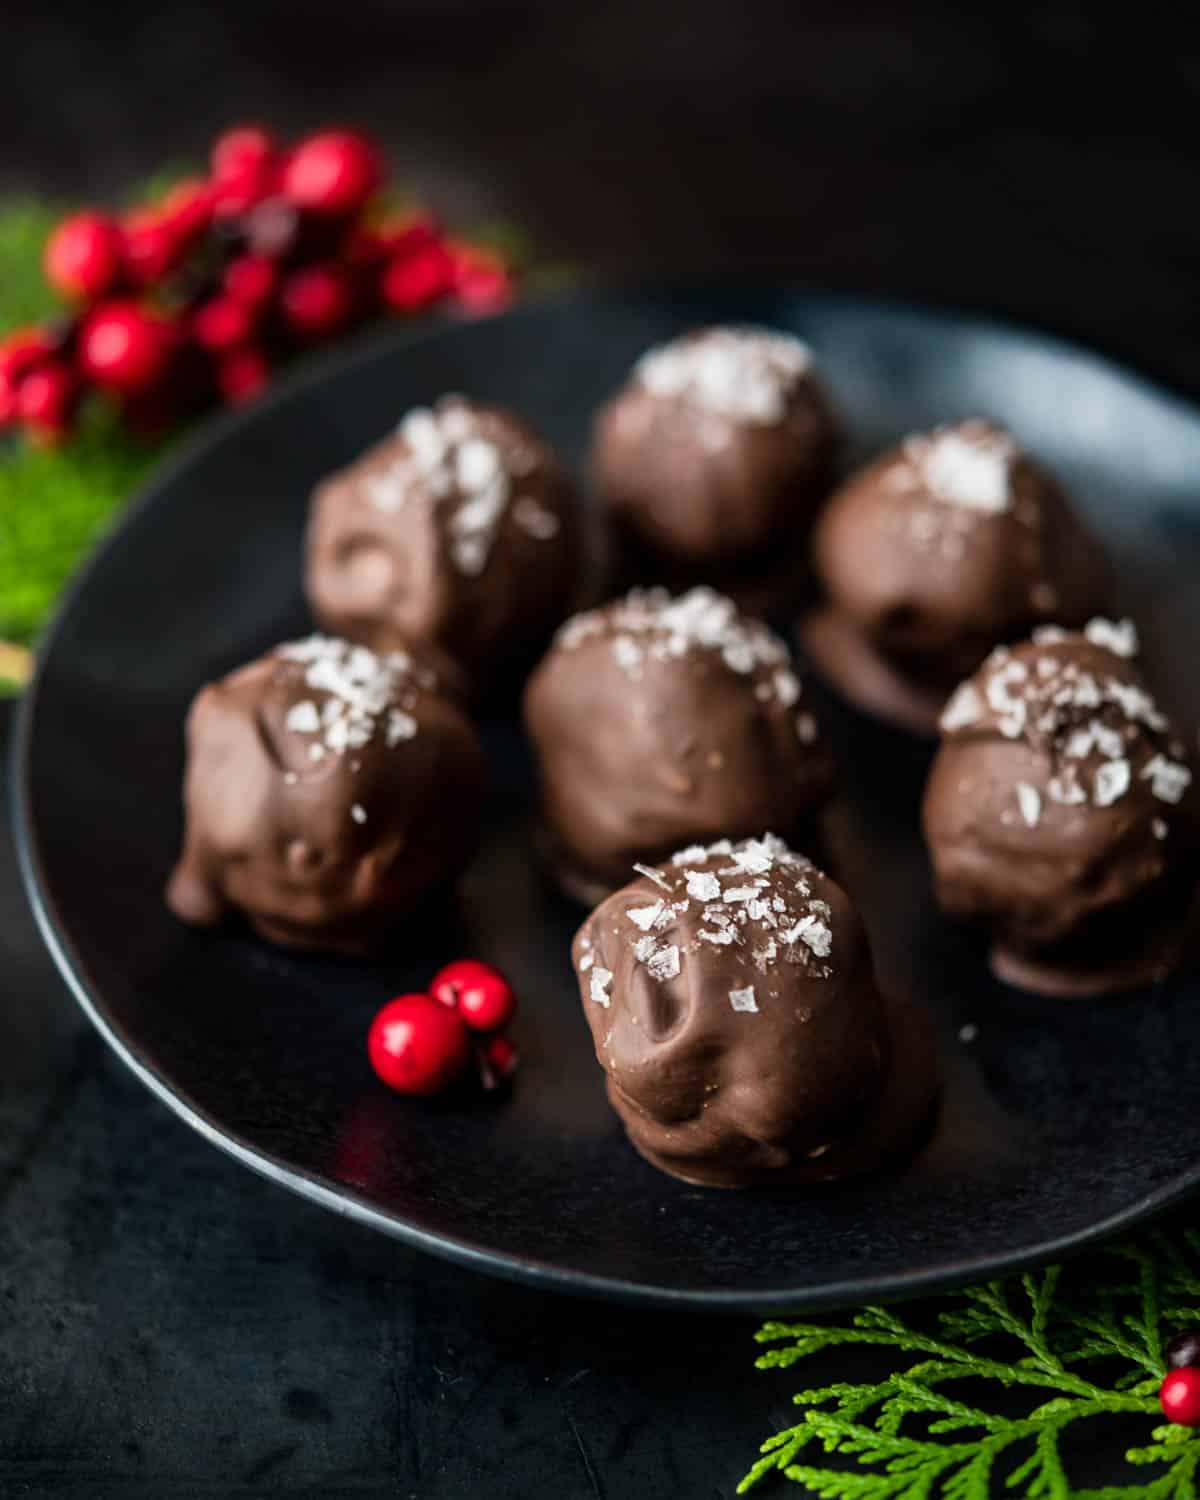 peanut butter chocolate balls on a black plate with holiday greenery and berries.